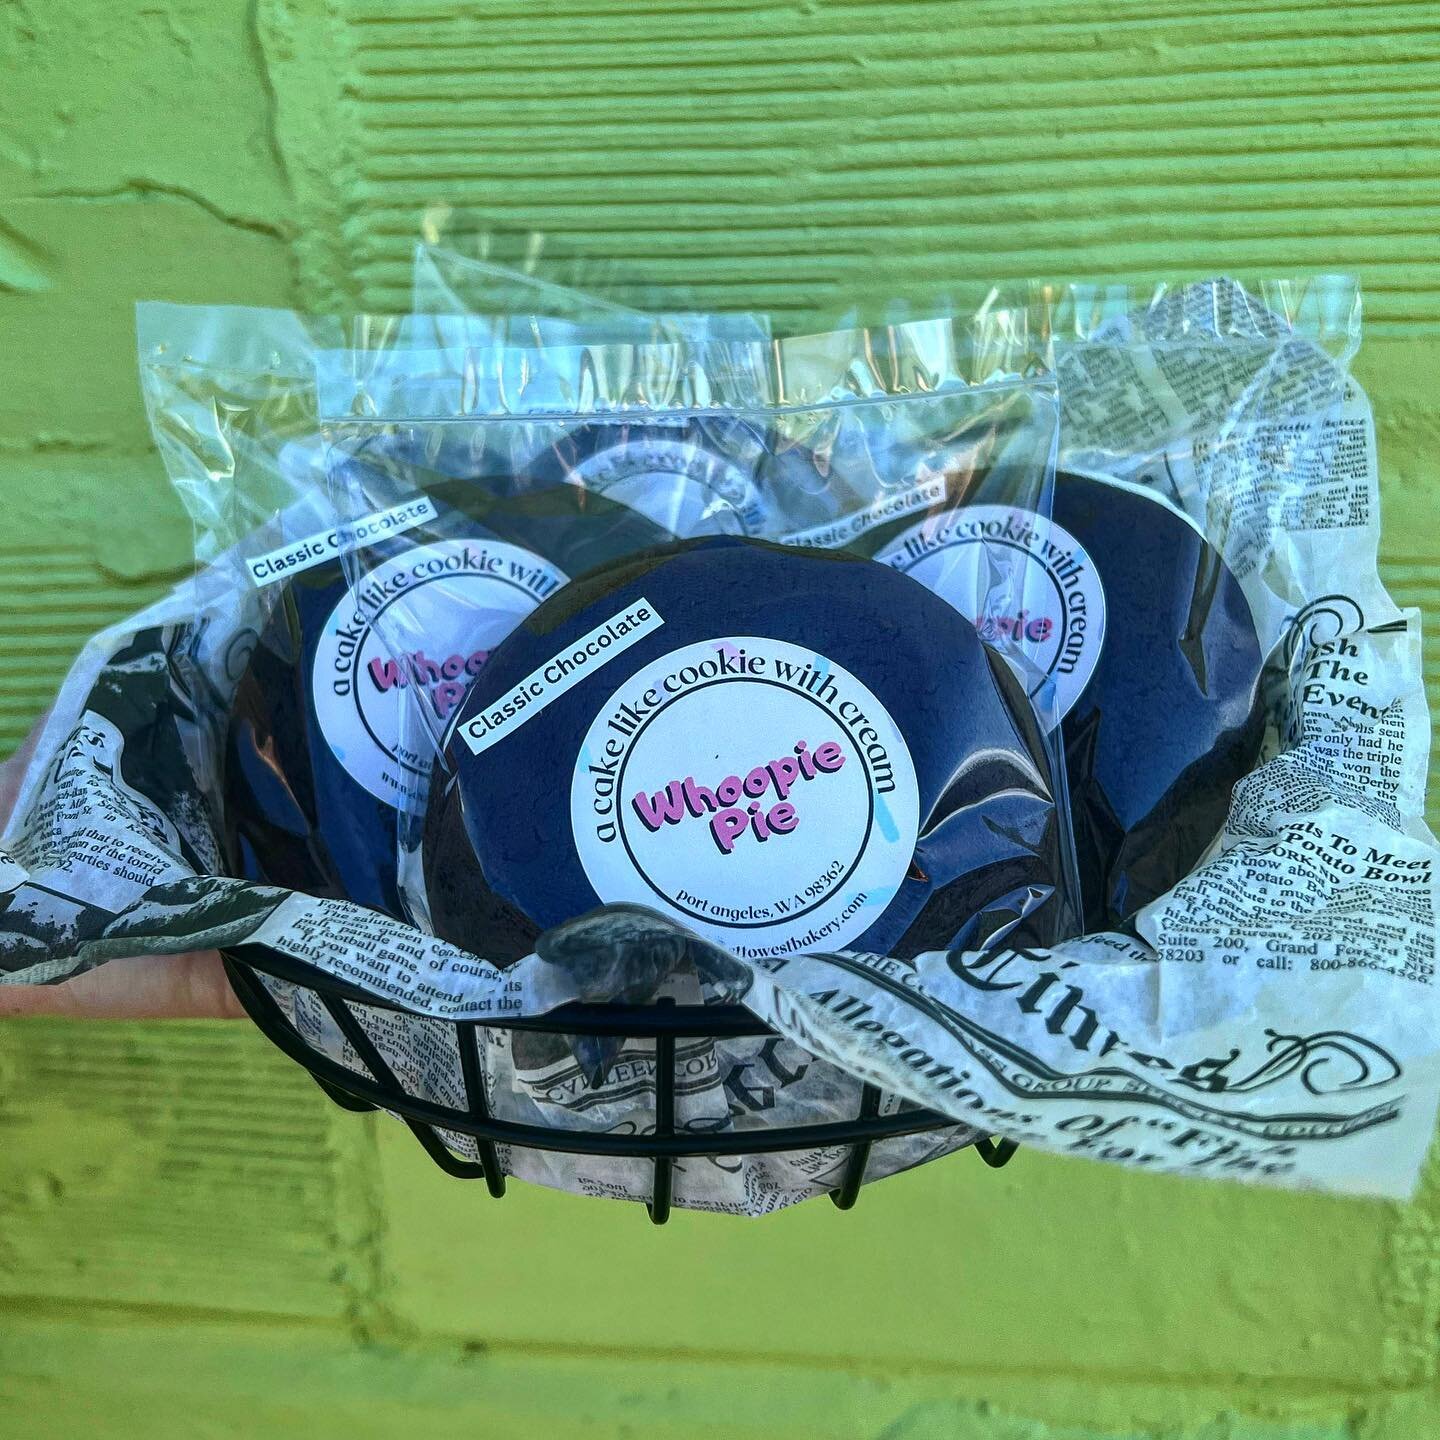 We Currently have Whoopie Pies at the Cafe! These scrumptious baked goodies are locally made in port Angeles, lets support our local small business bakeries.